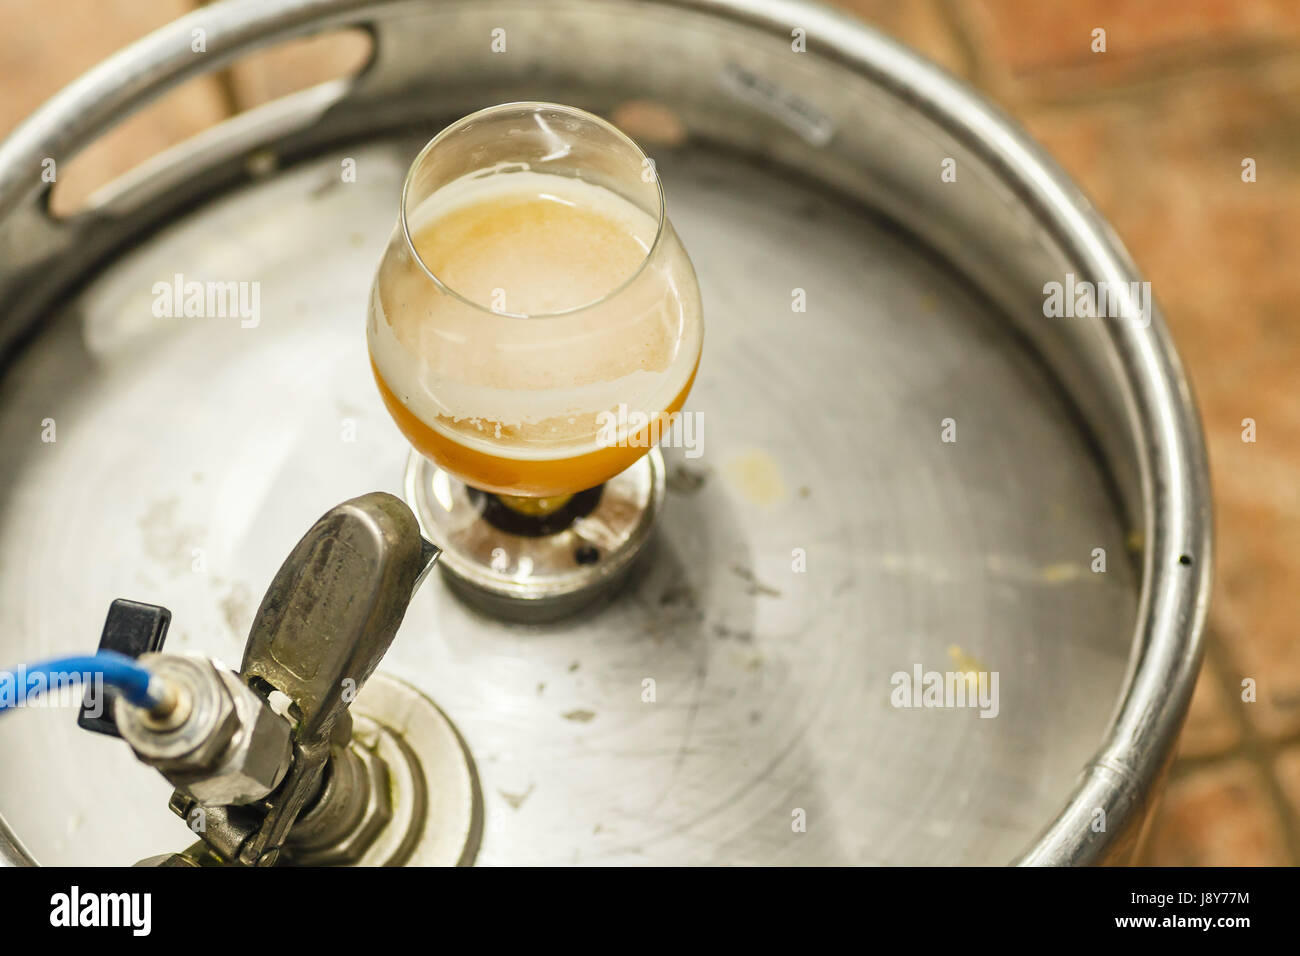 Glass of opaque wheat beer standing on a stainless steel keg at a brewery Stock Photo